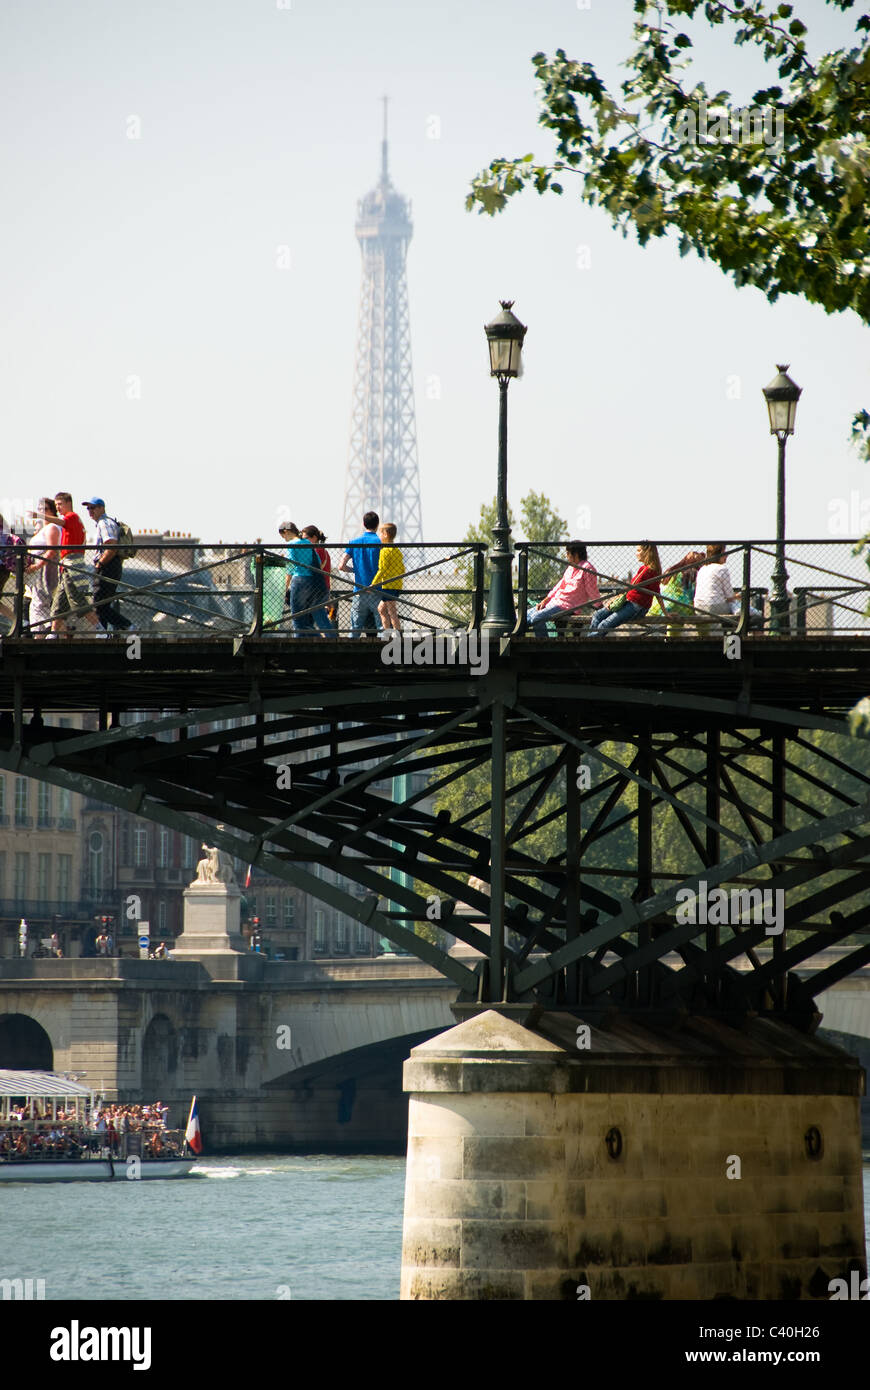 Pont des Arts - All You Need to Know BEFORE You Go (with Photos)